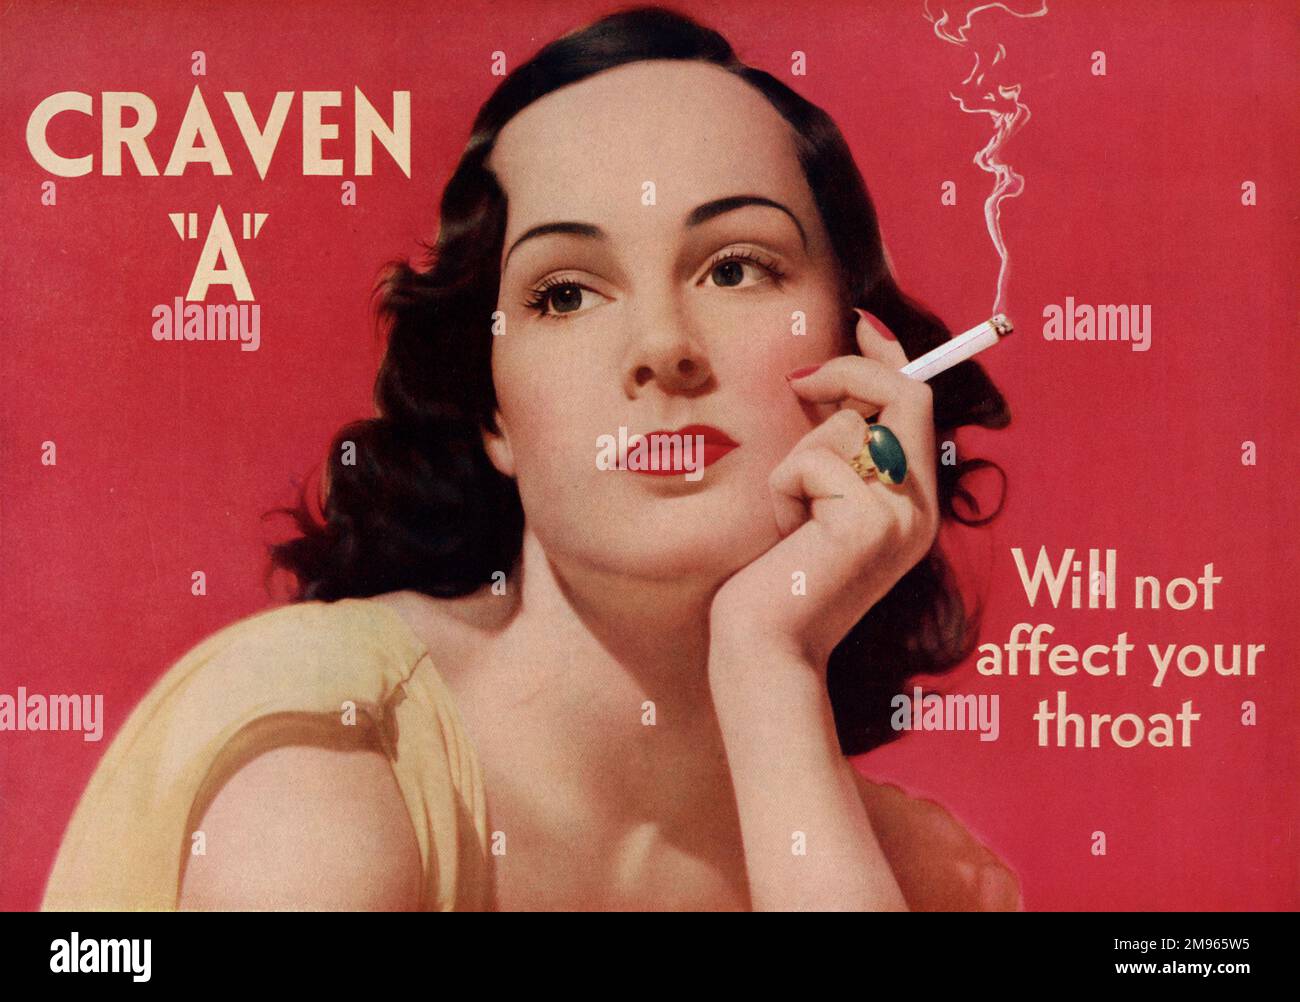 Advert for Craven A cigarettes showing a glamorous brunette smoking, with the tagline 'Will not affect your throat'. Stock Photo